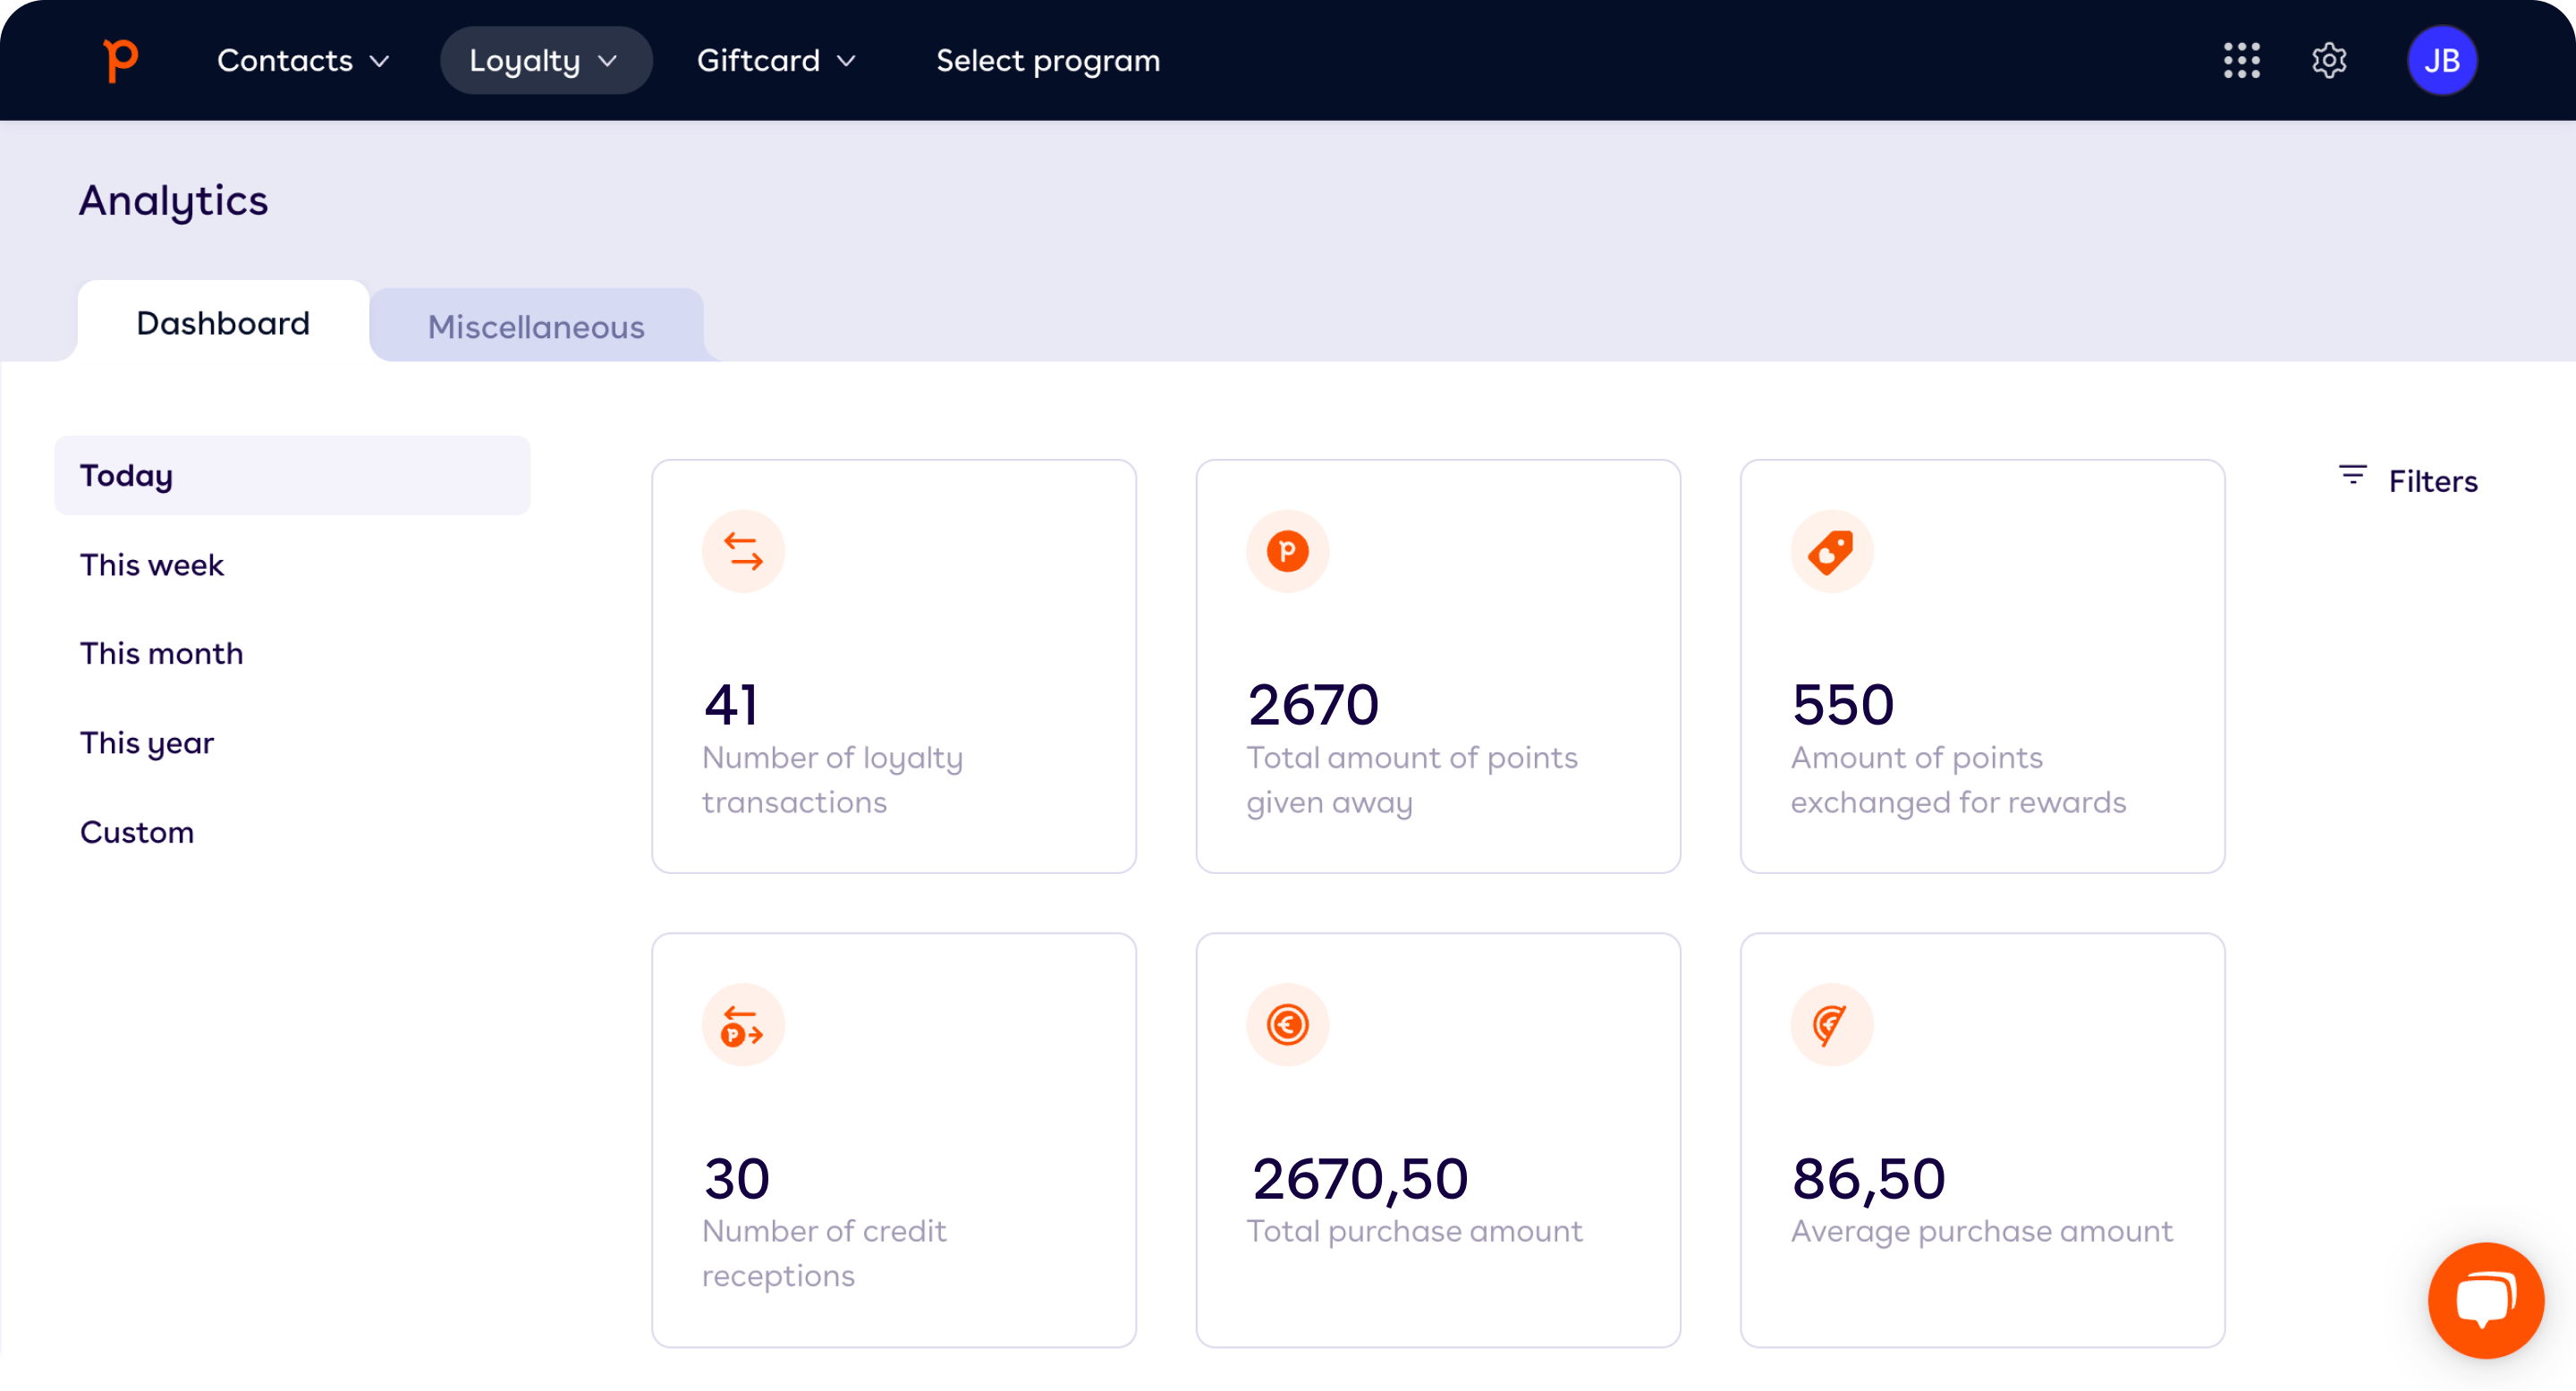 Brand Loyalty Software - Easily check the progress of your rewards program in the analytics dashboard.